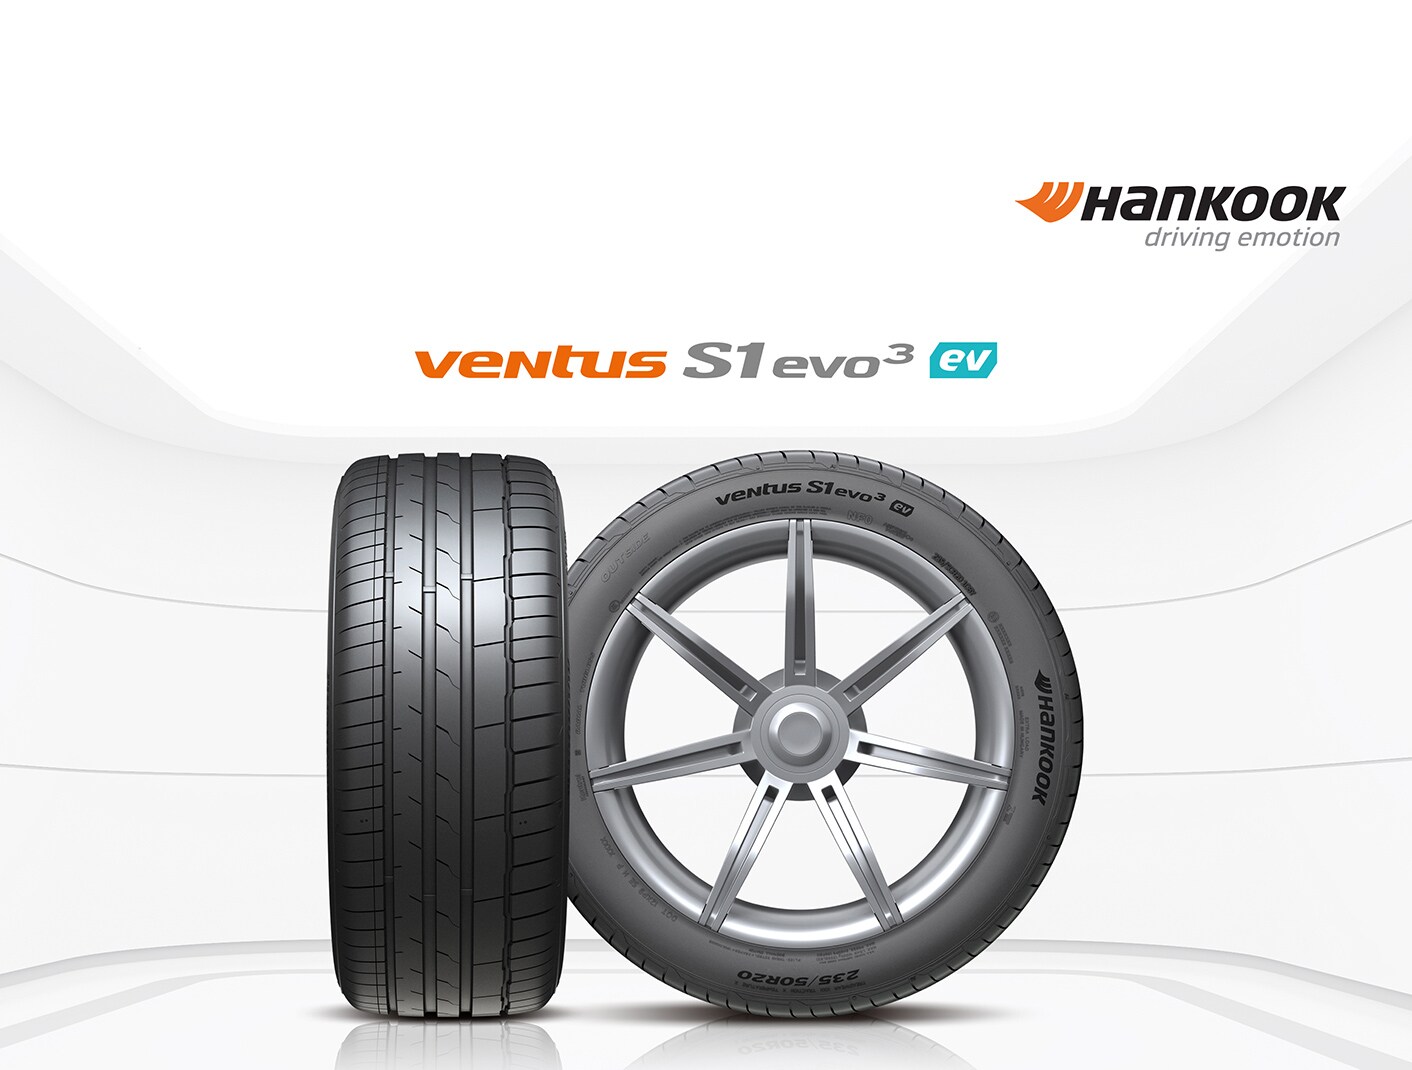 Hankook Tire to equip Toyota’s first all-electric vehicle bZ4X